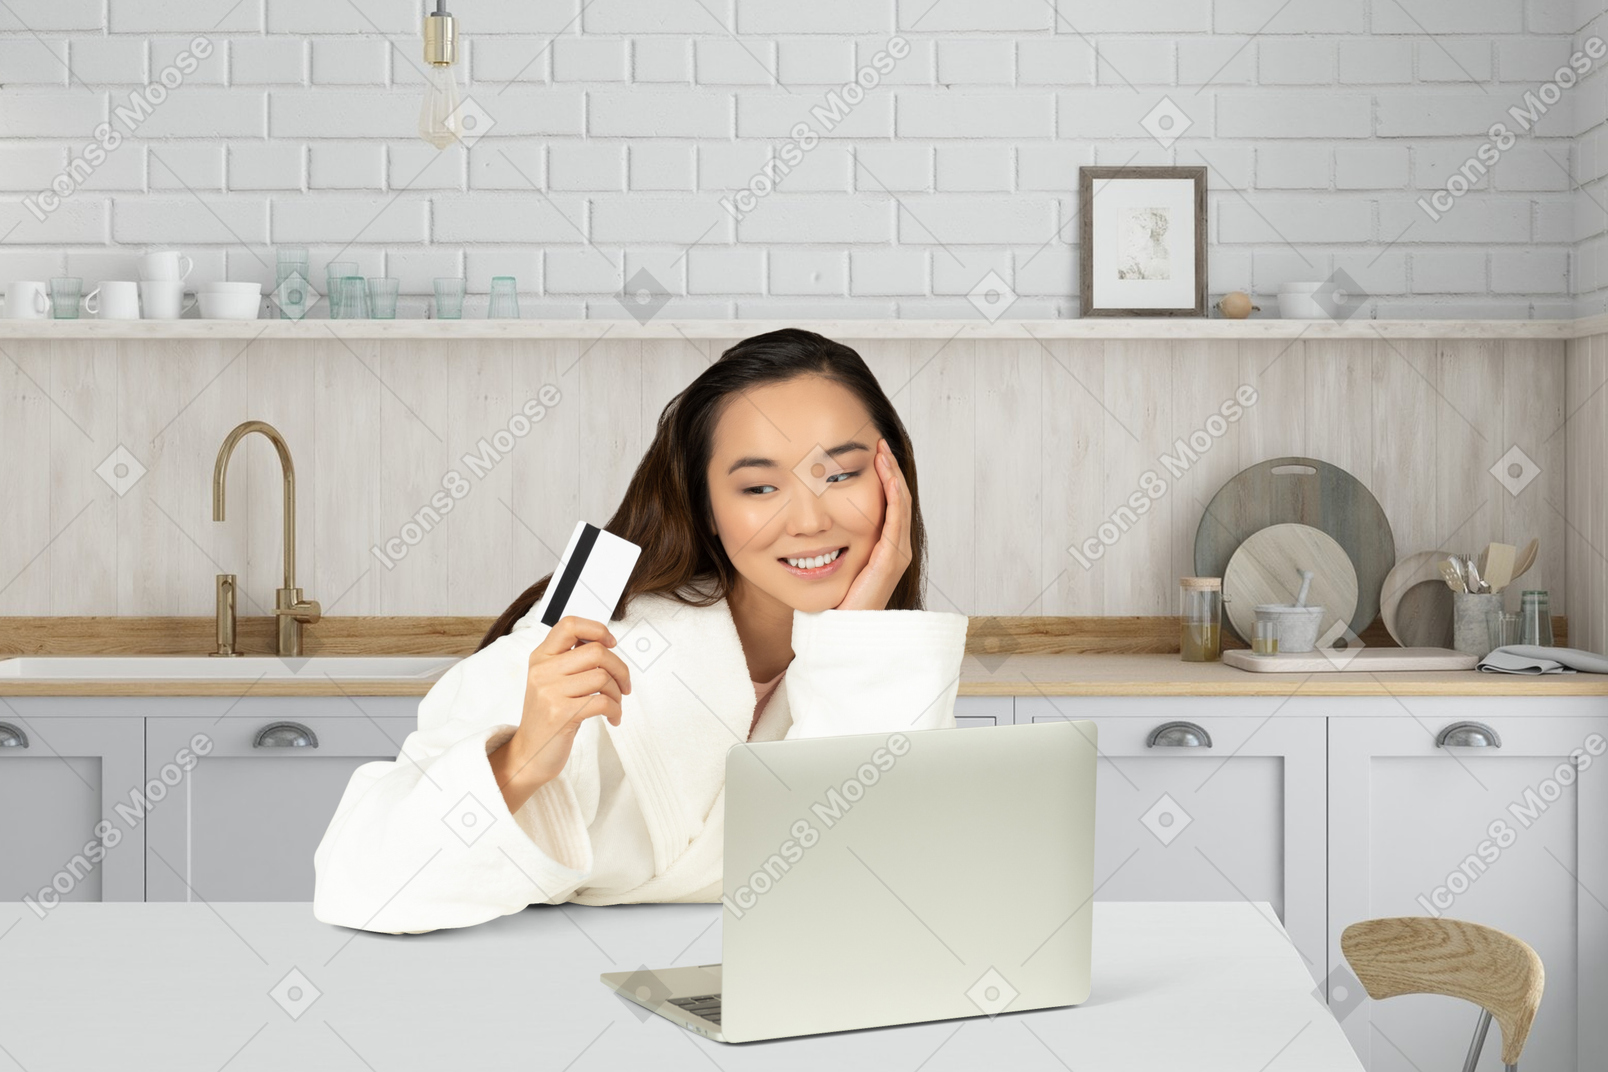 A woman sitting at a kitchen table holding a credit card and looking at a laptop